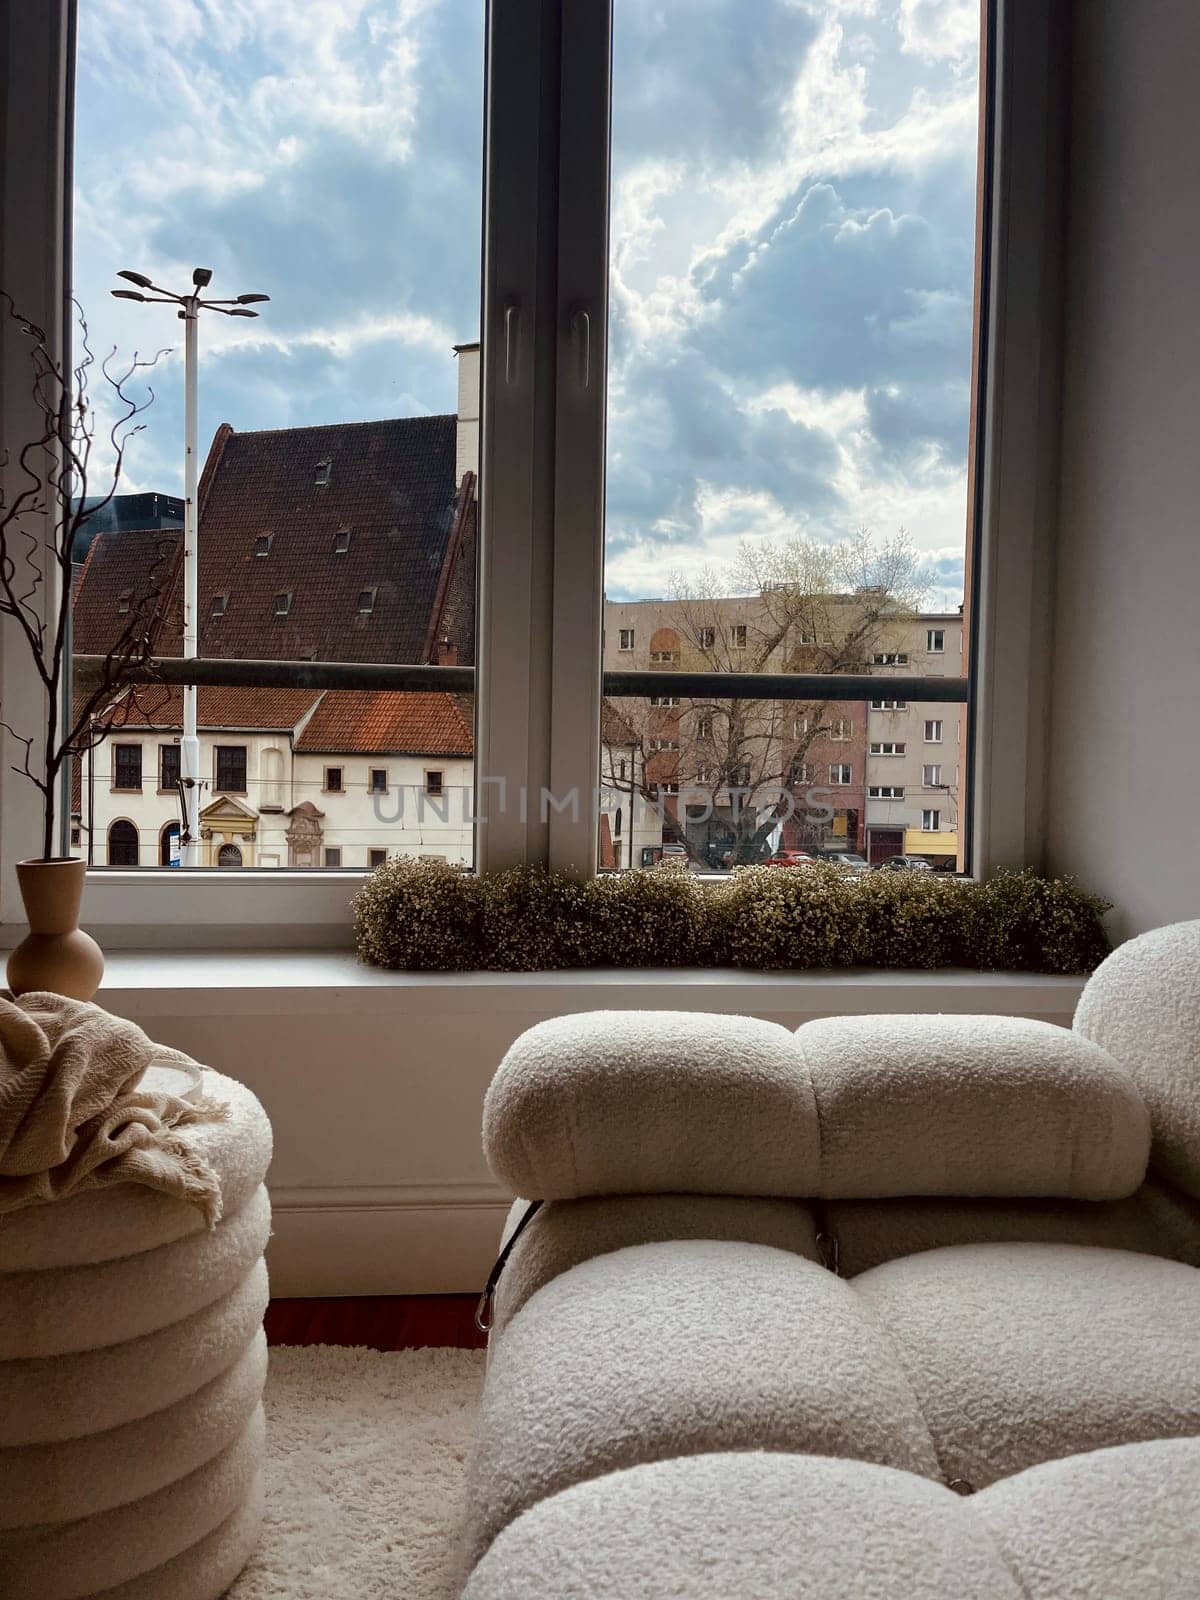 Part of the decoration in the interior, a vase and a view of the city from the window. High quality photo